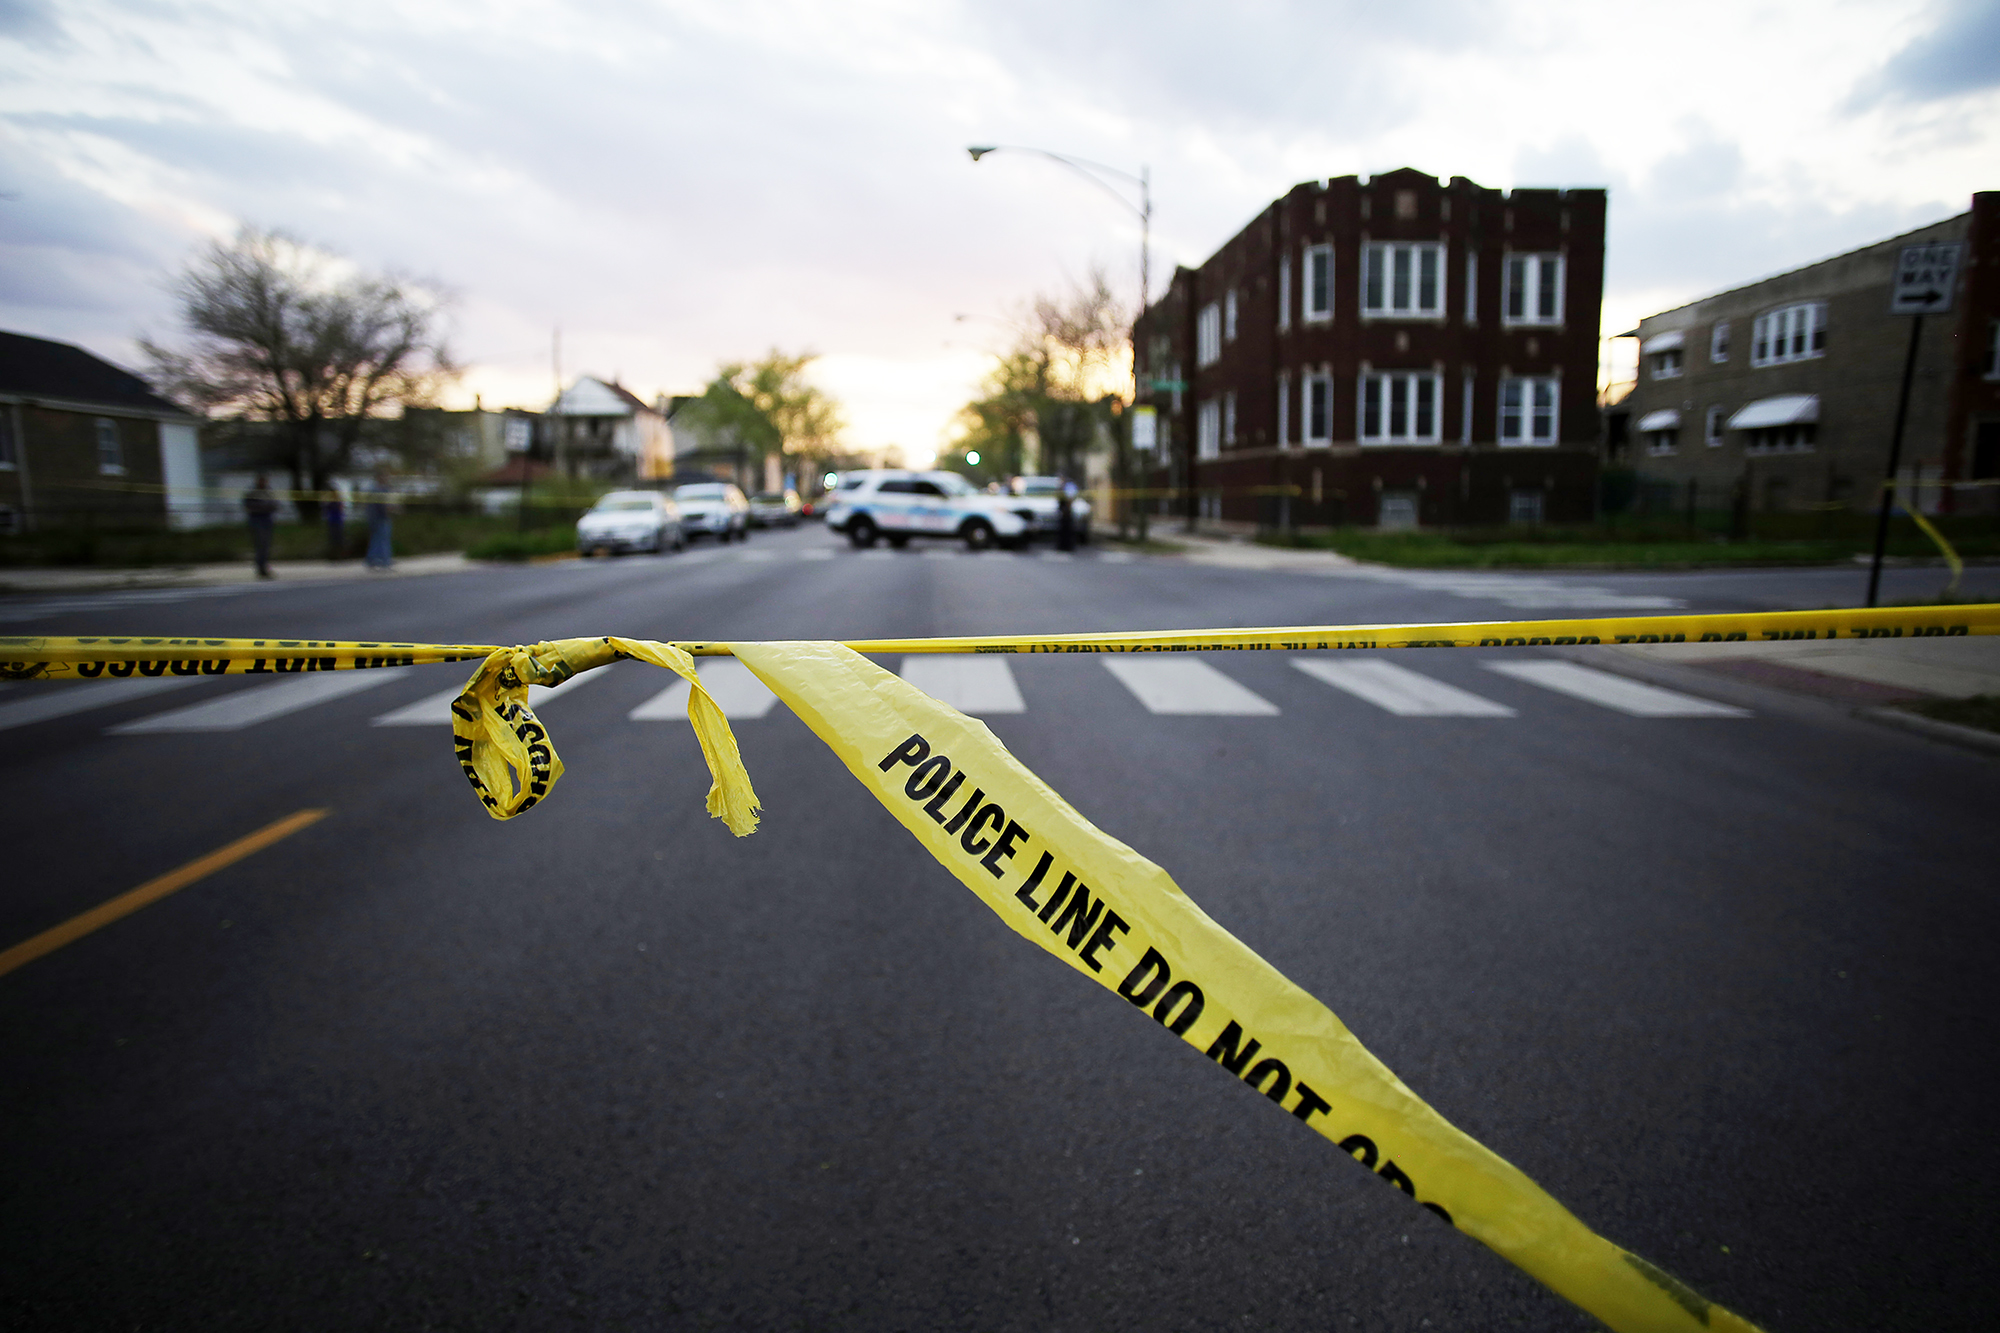 Gun Violence Continues To Plague Chicago, Over 1,000 Shootings For Year To Date